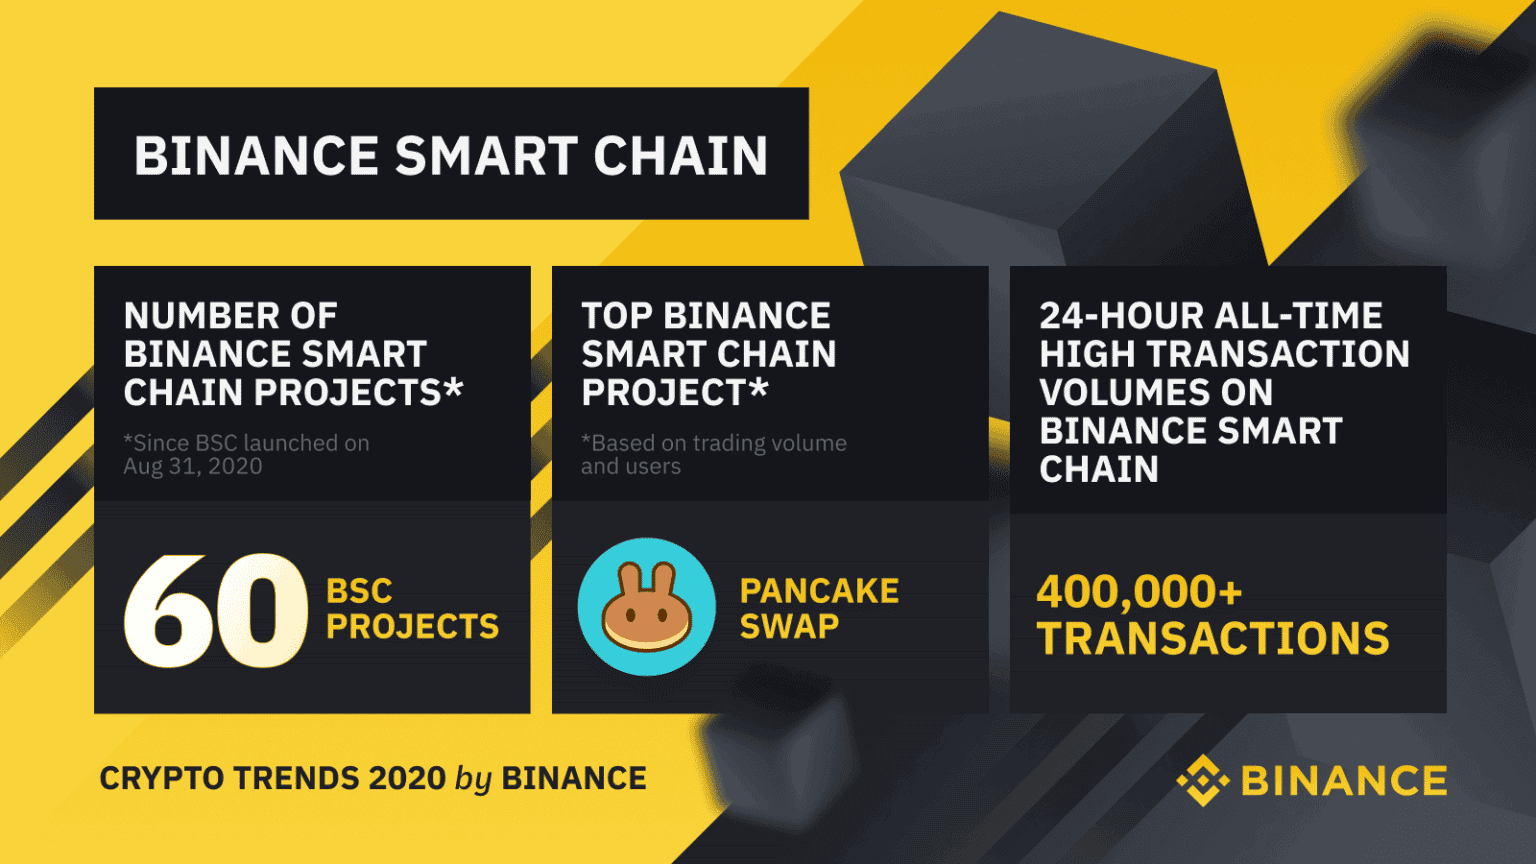 Binance DEFI "What is BSC & Pancake Swap all about?"